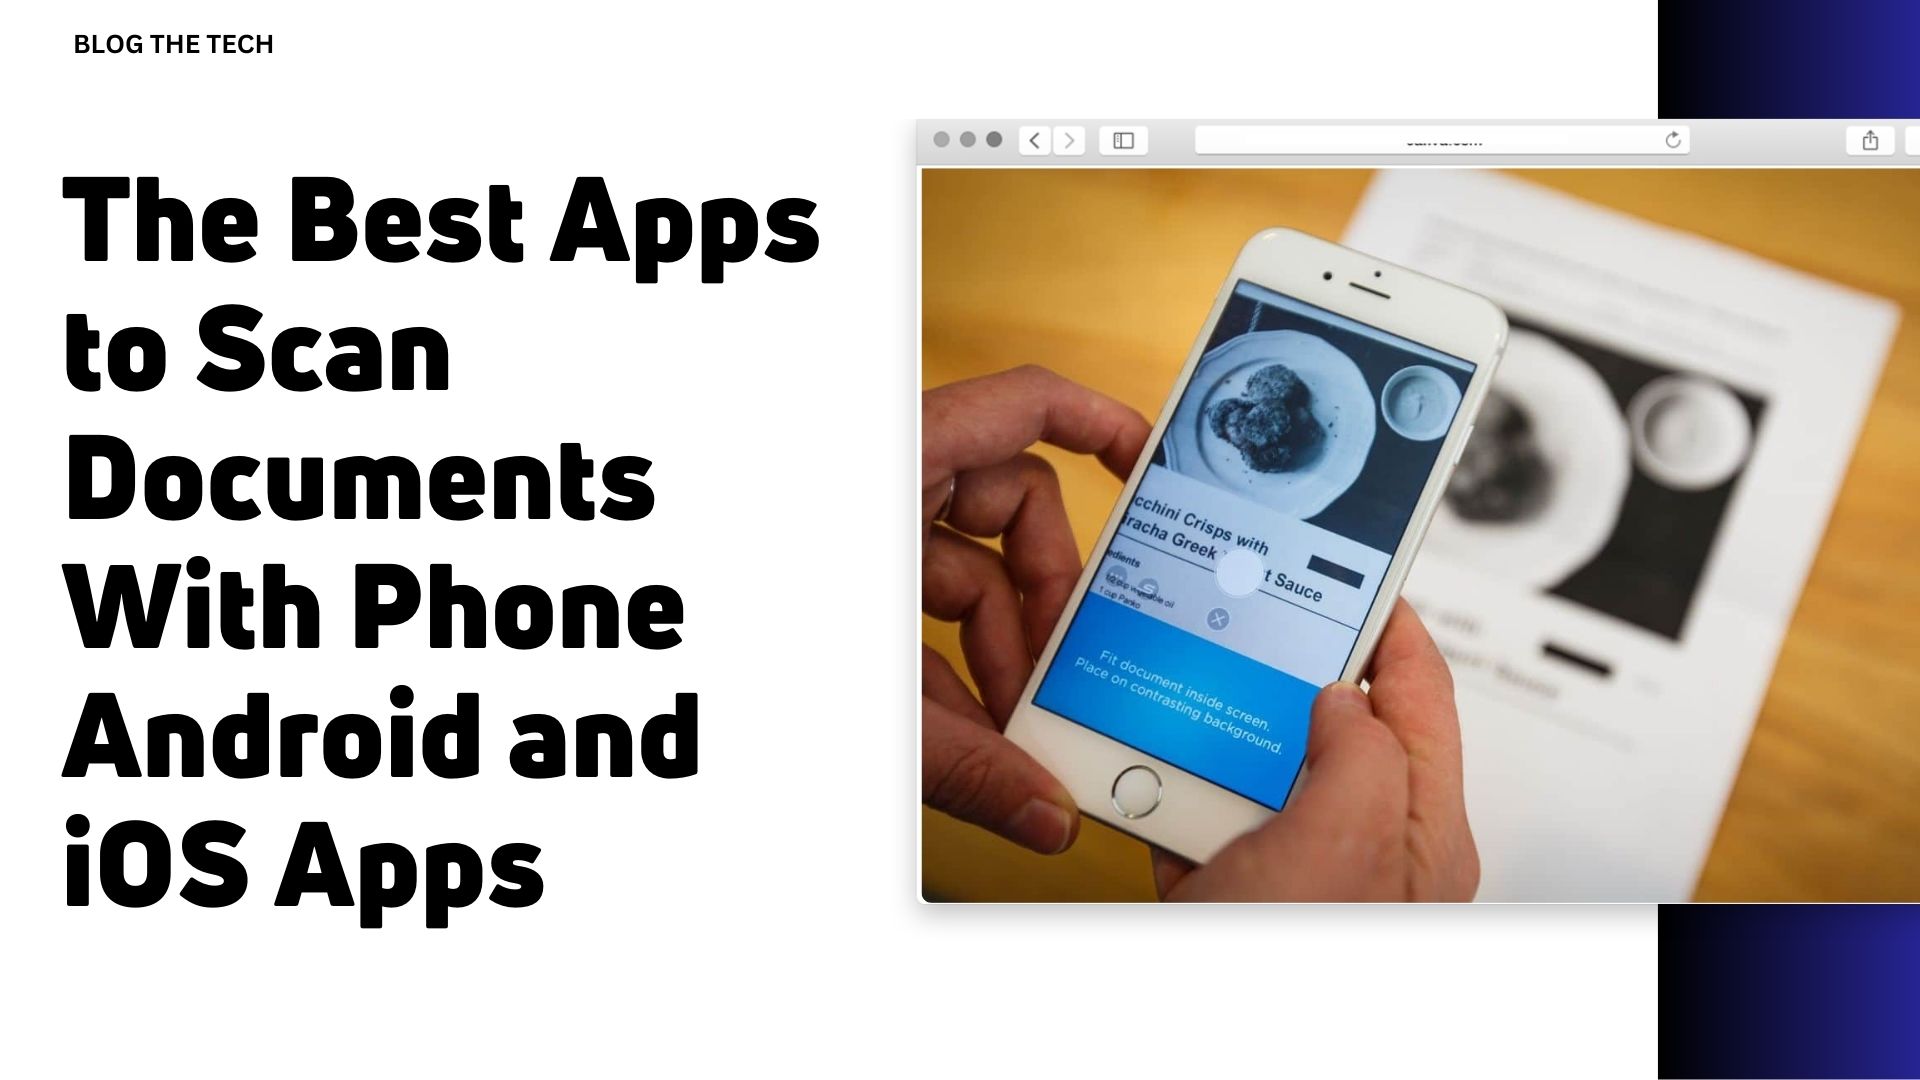 Best-Apps-to-Scan-Documents-With-Phone-Android-and-iOS-Apps-featured